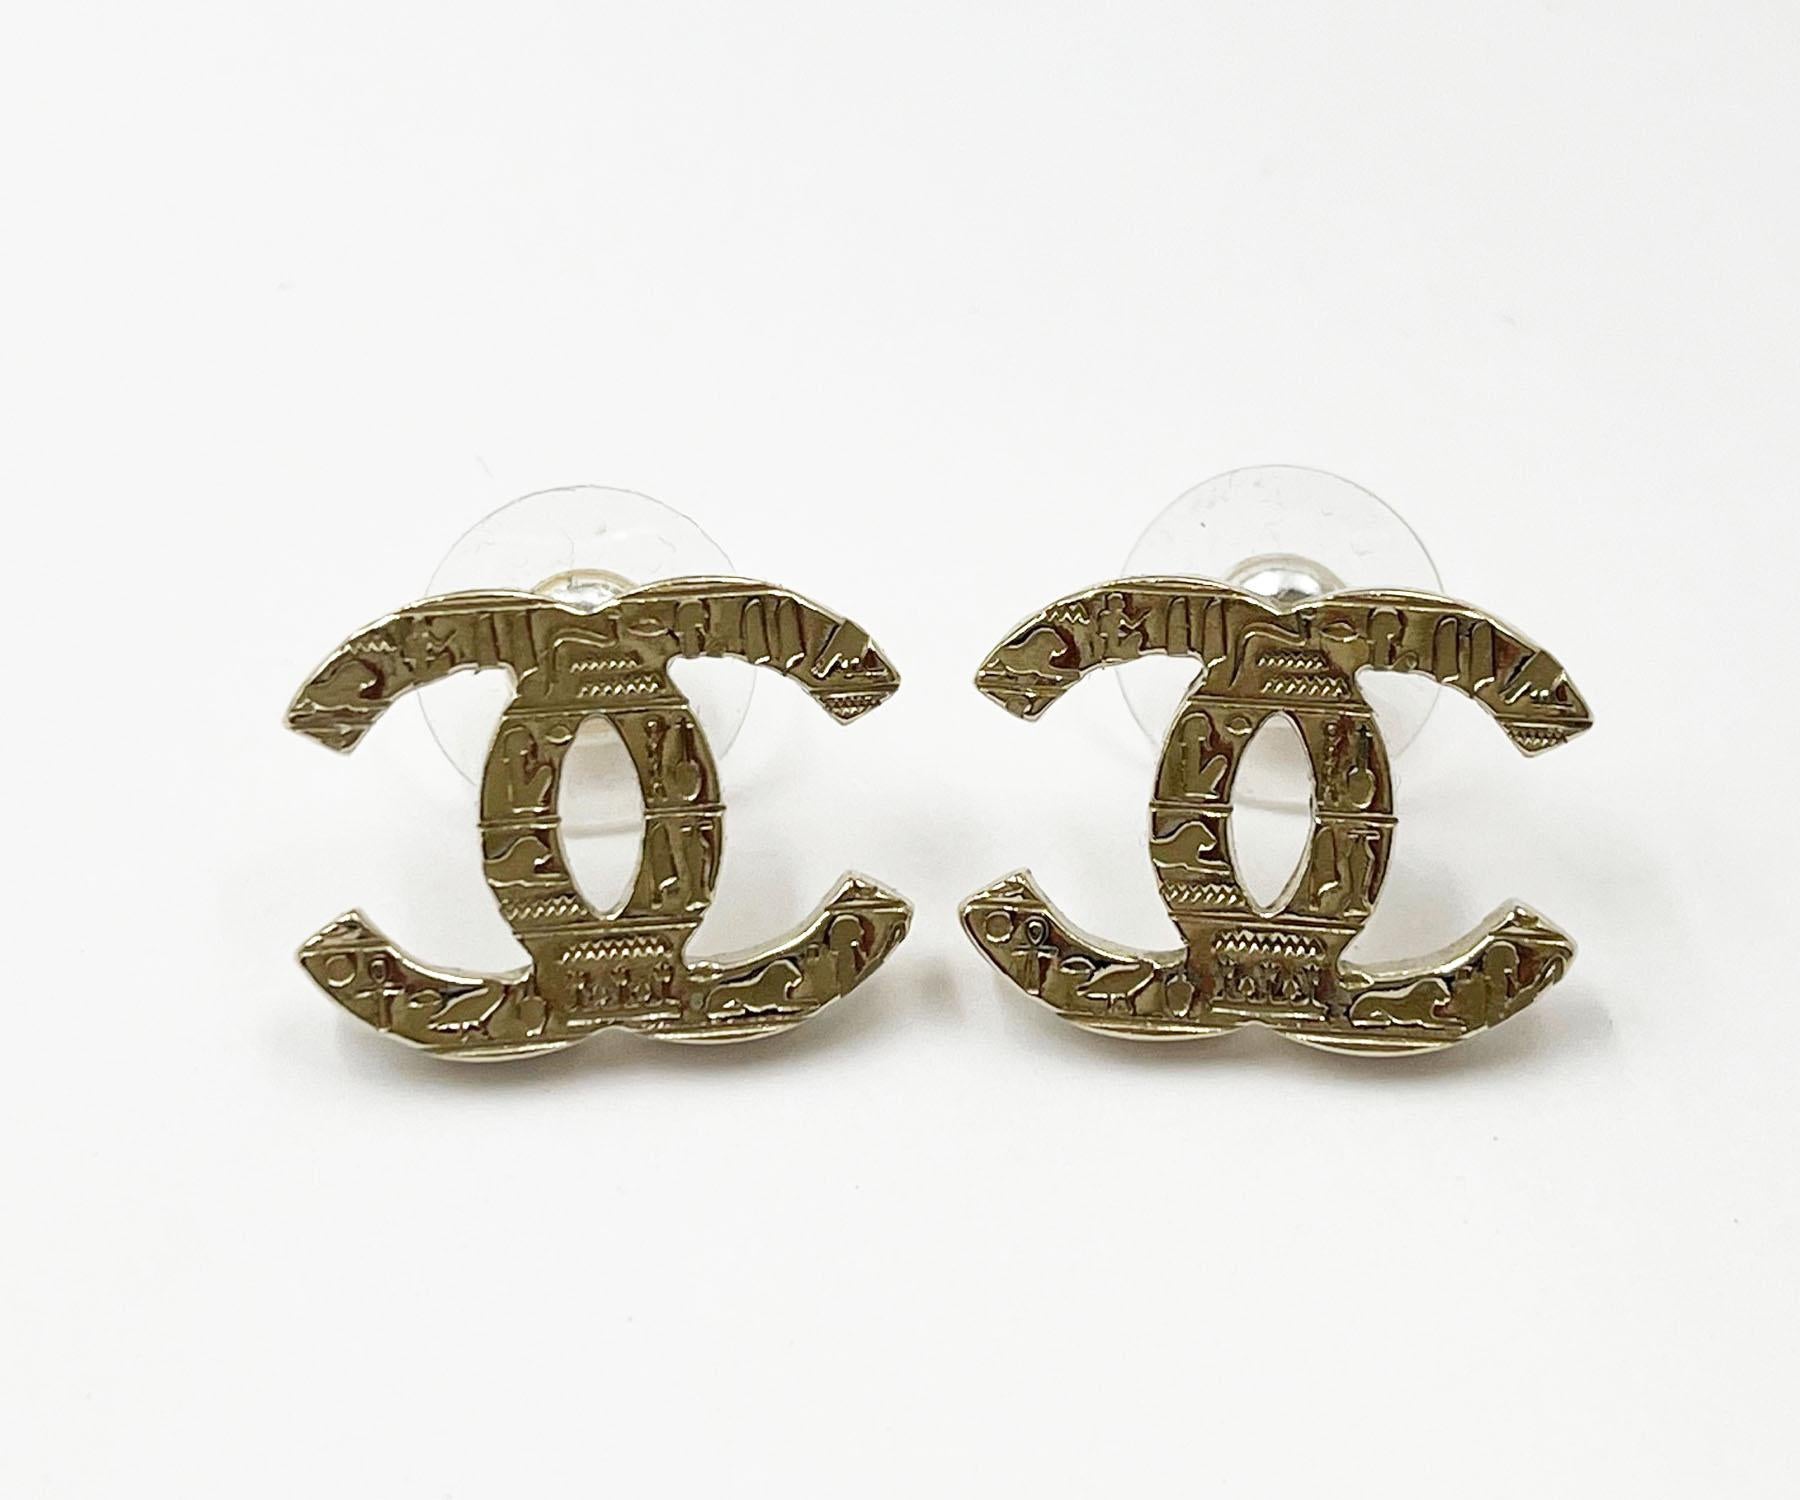 Chanel Gold CC Hieroglyphs Piercing Earrings

*Marked 19
*Made in France
*Comes with the original box, pouch and booklet

-It is approximately 0.75